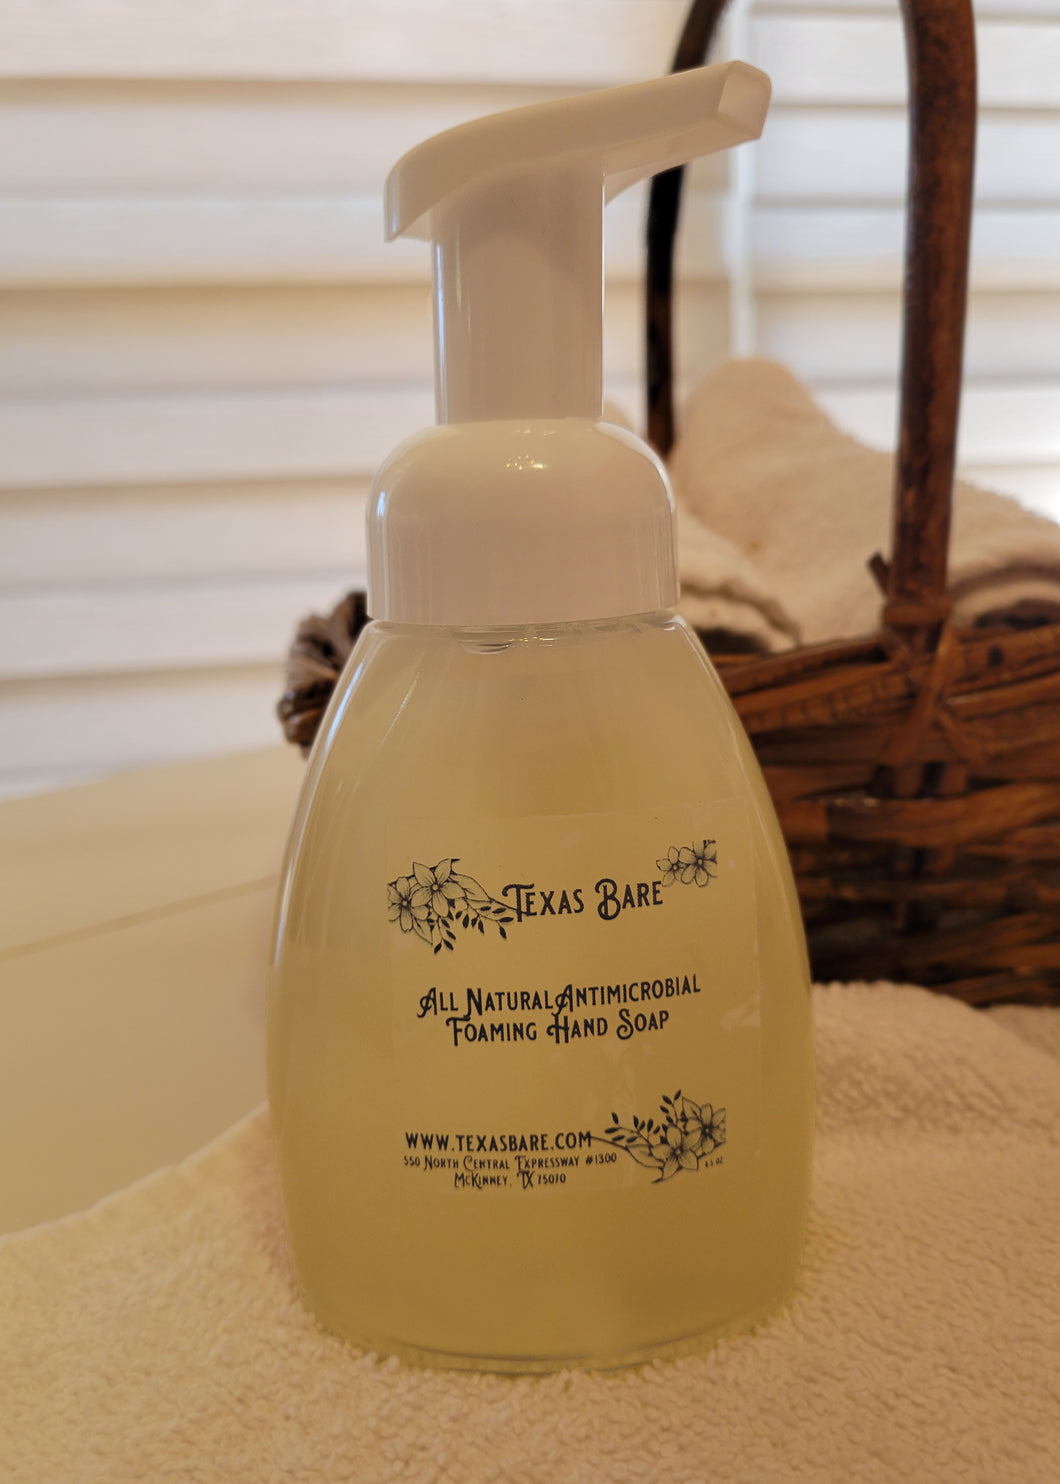 All Natural Antimicrobial Foaming Hand Soap